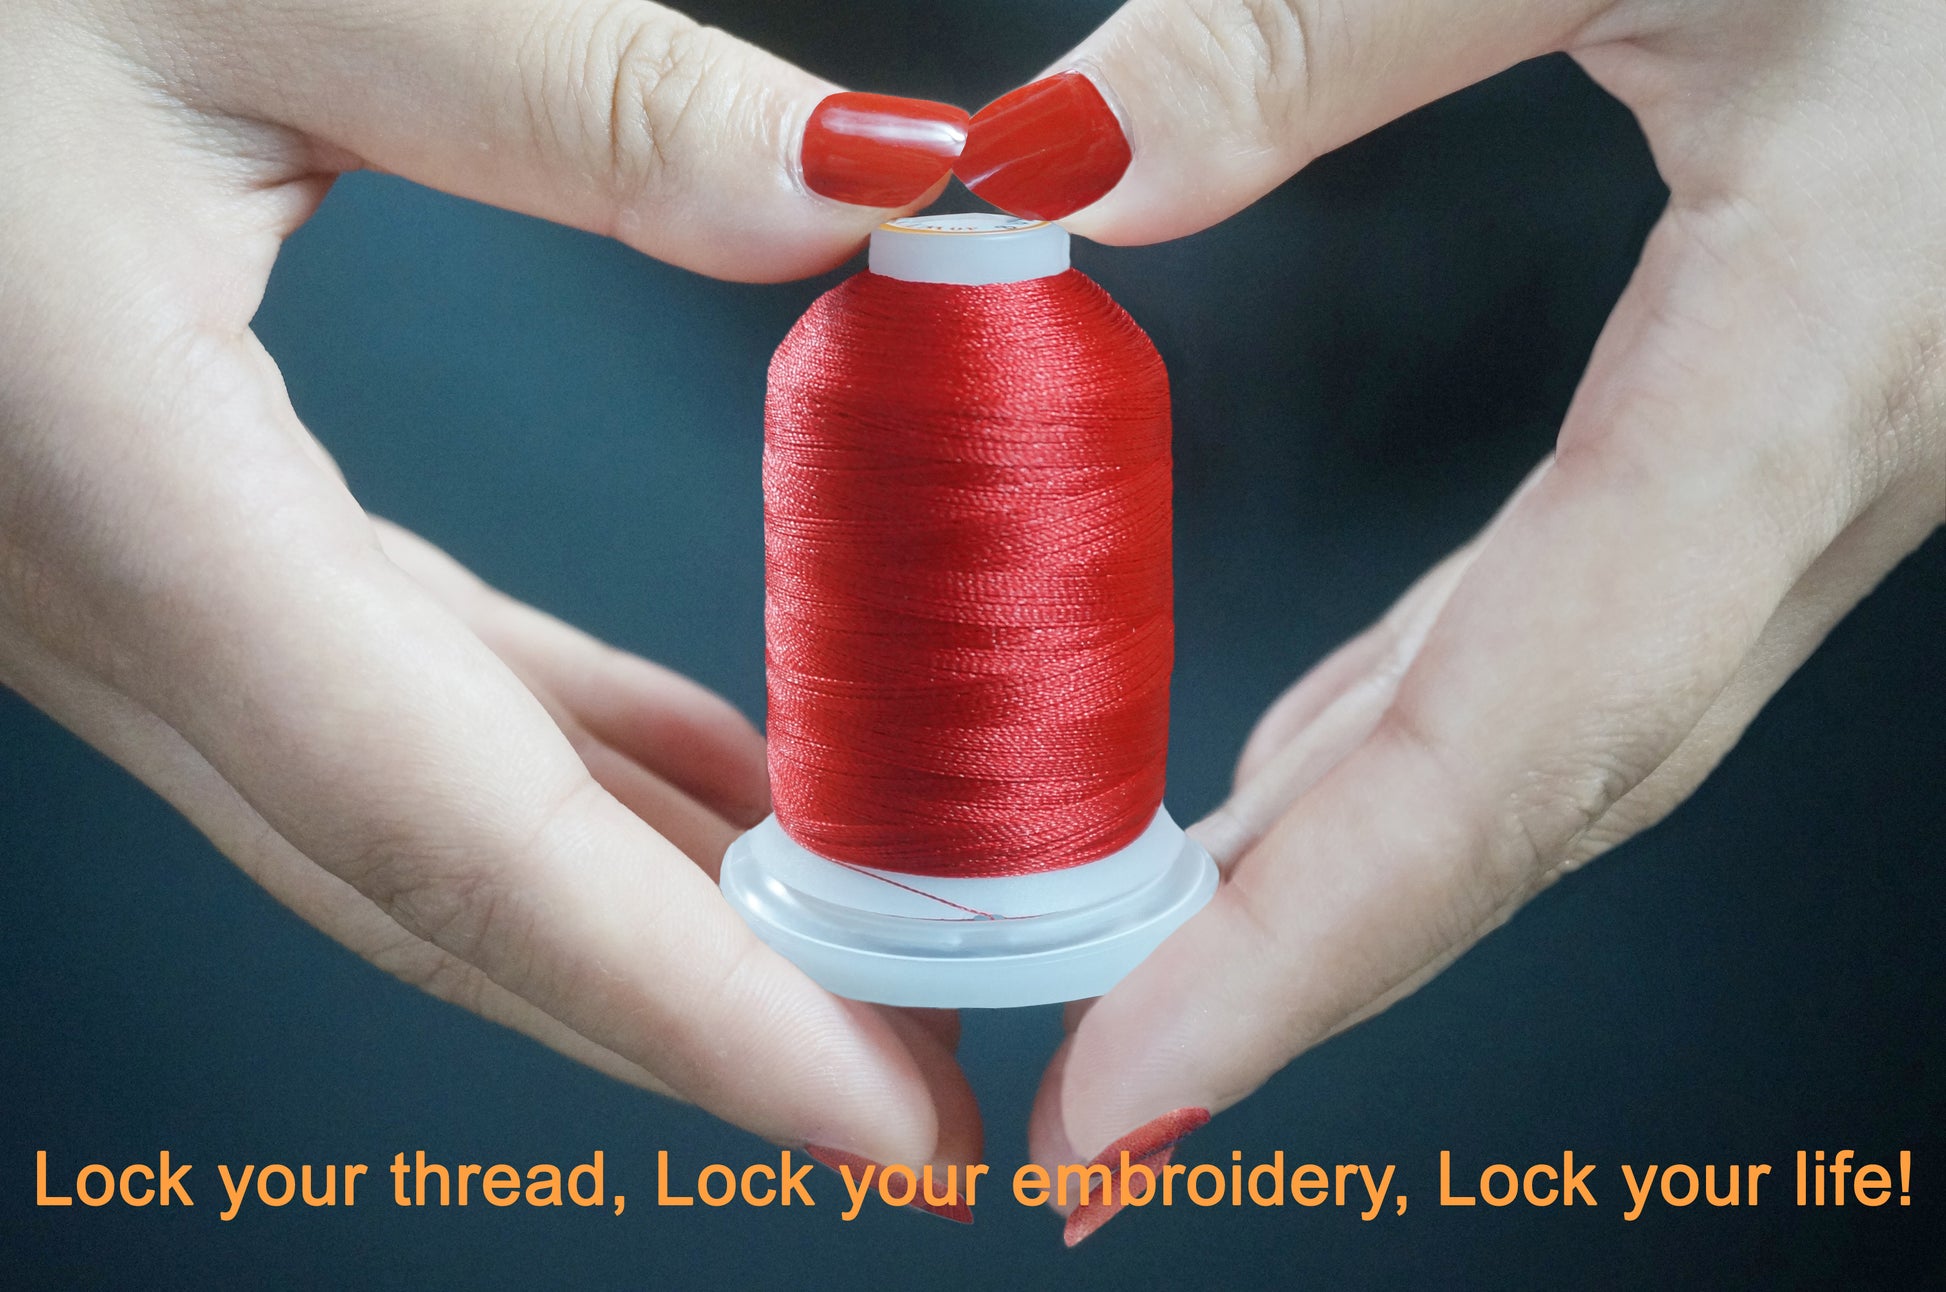 New brothread - Single Huge Spool 5000M Each Polyester Embroidery